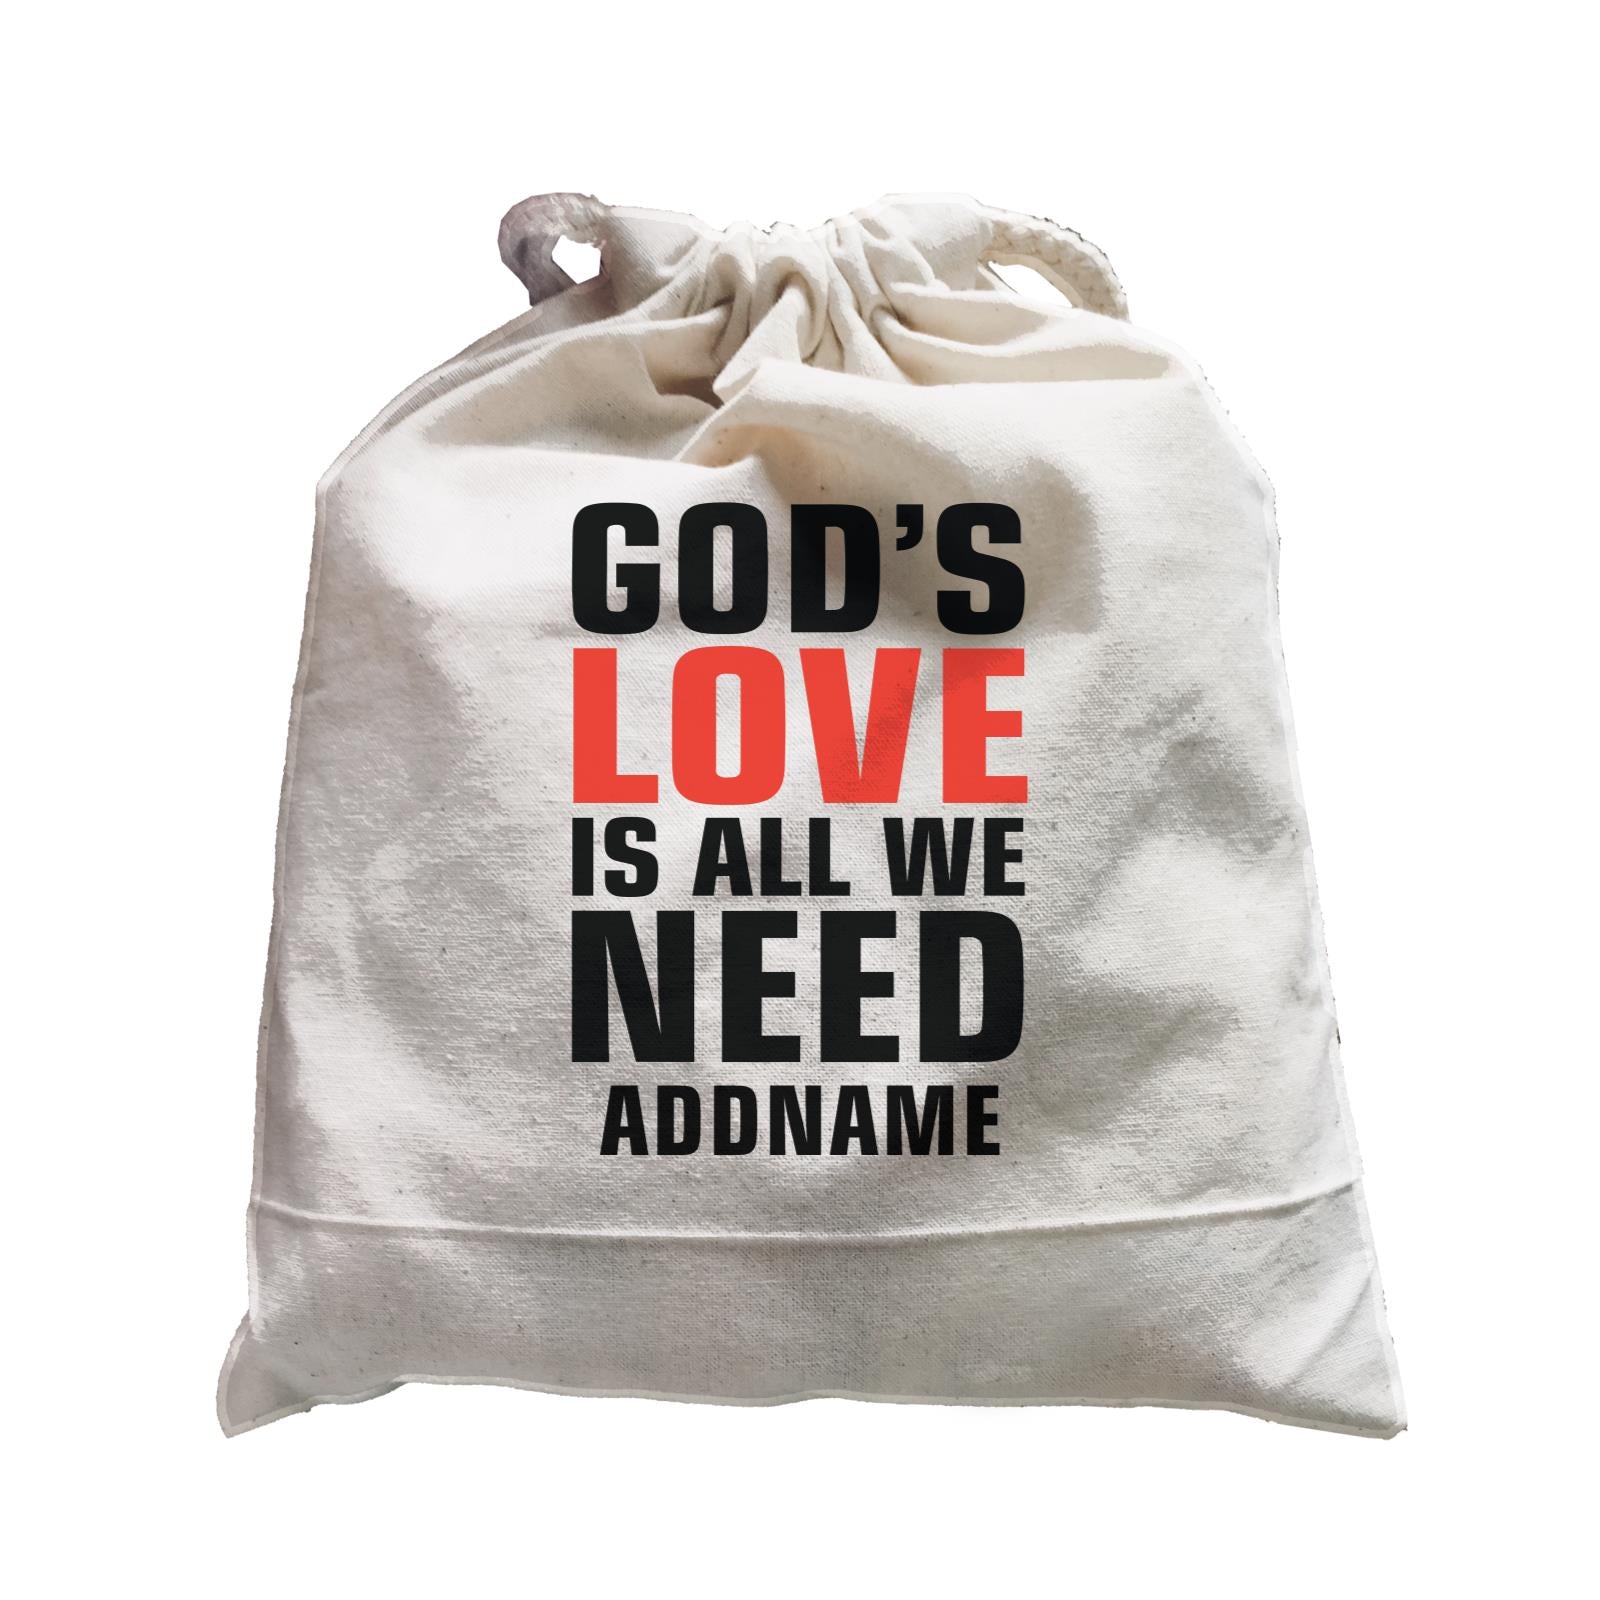 Inspiration Quotes God's Love Is All We Need Addname Satchel